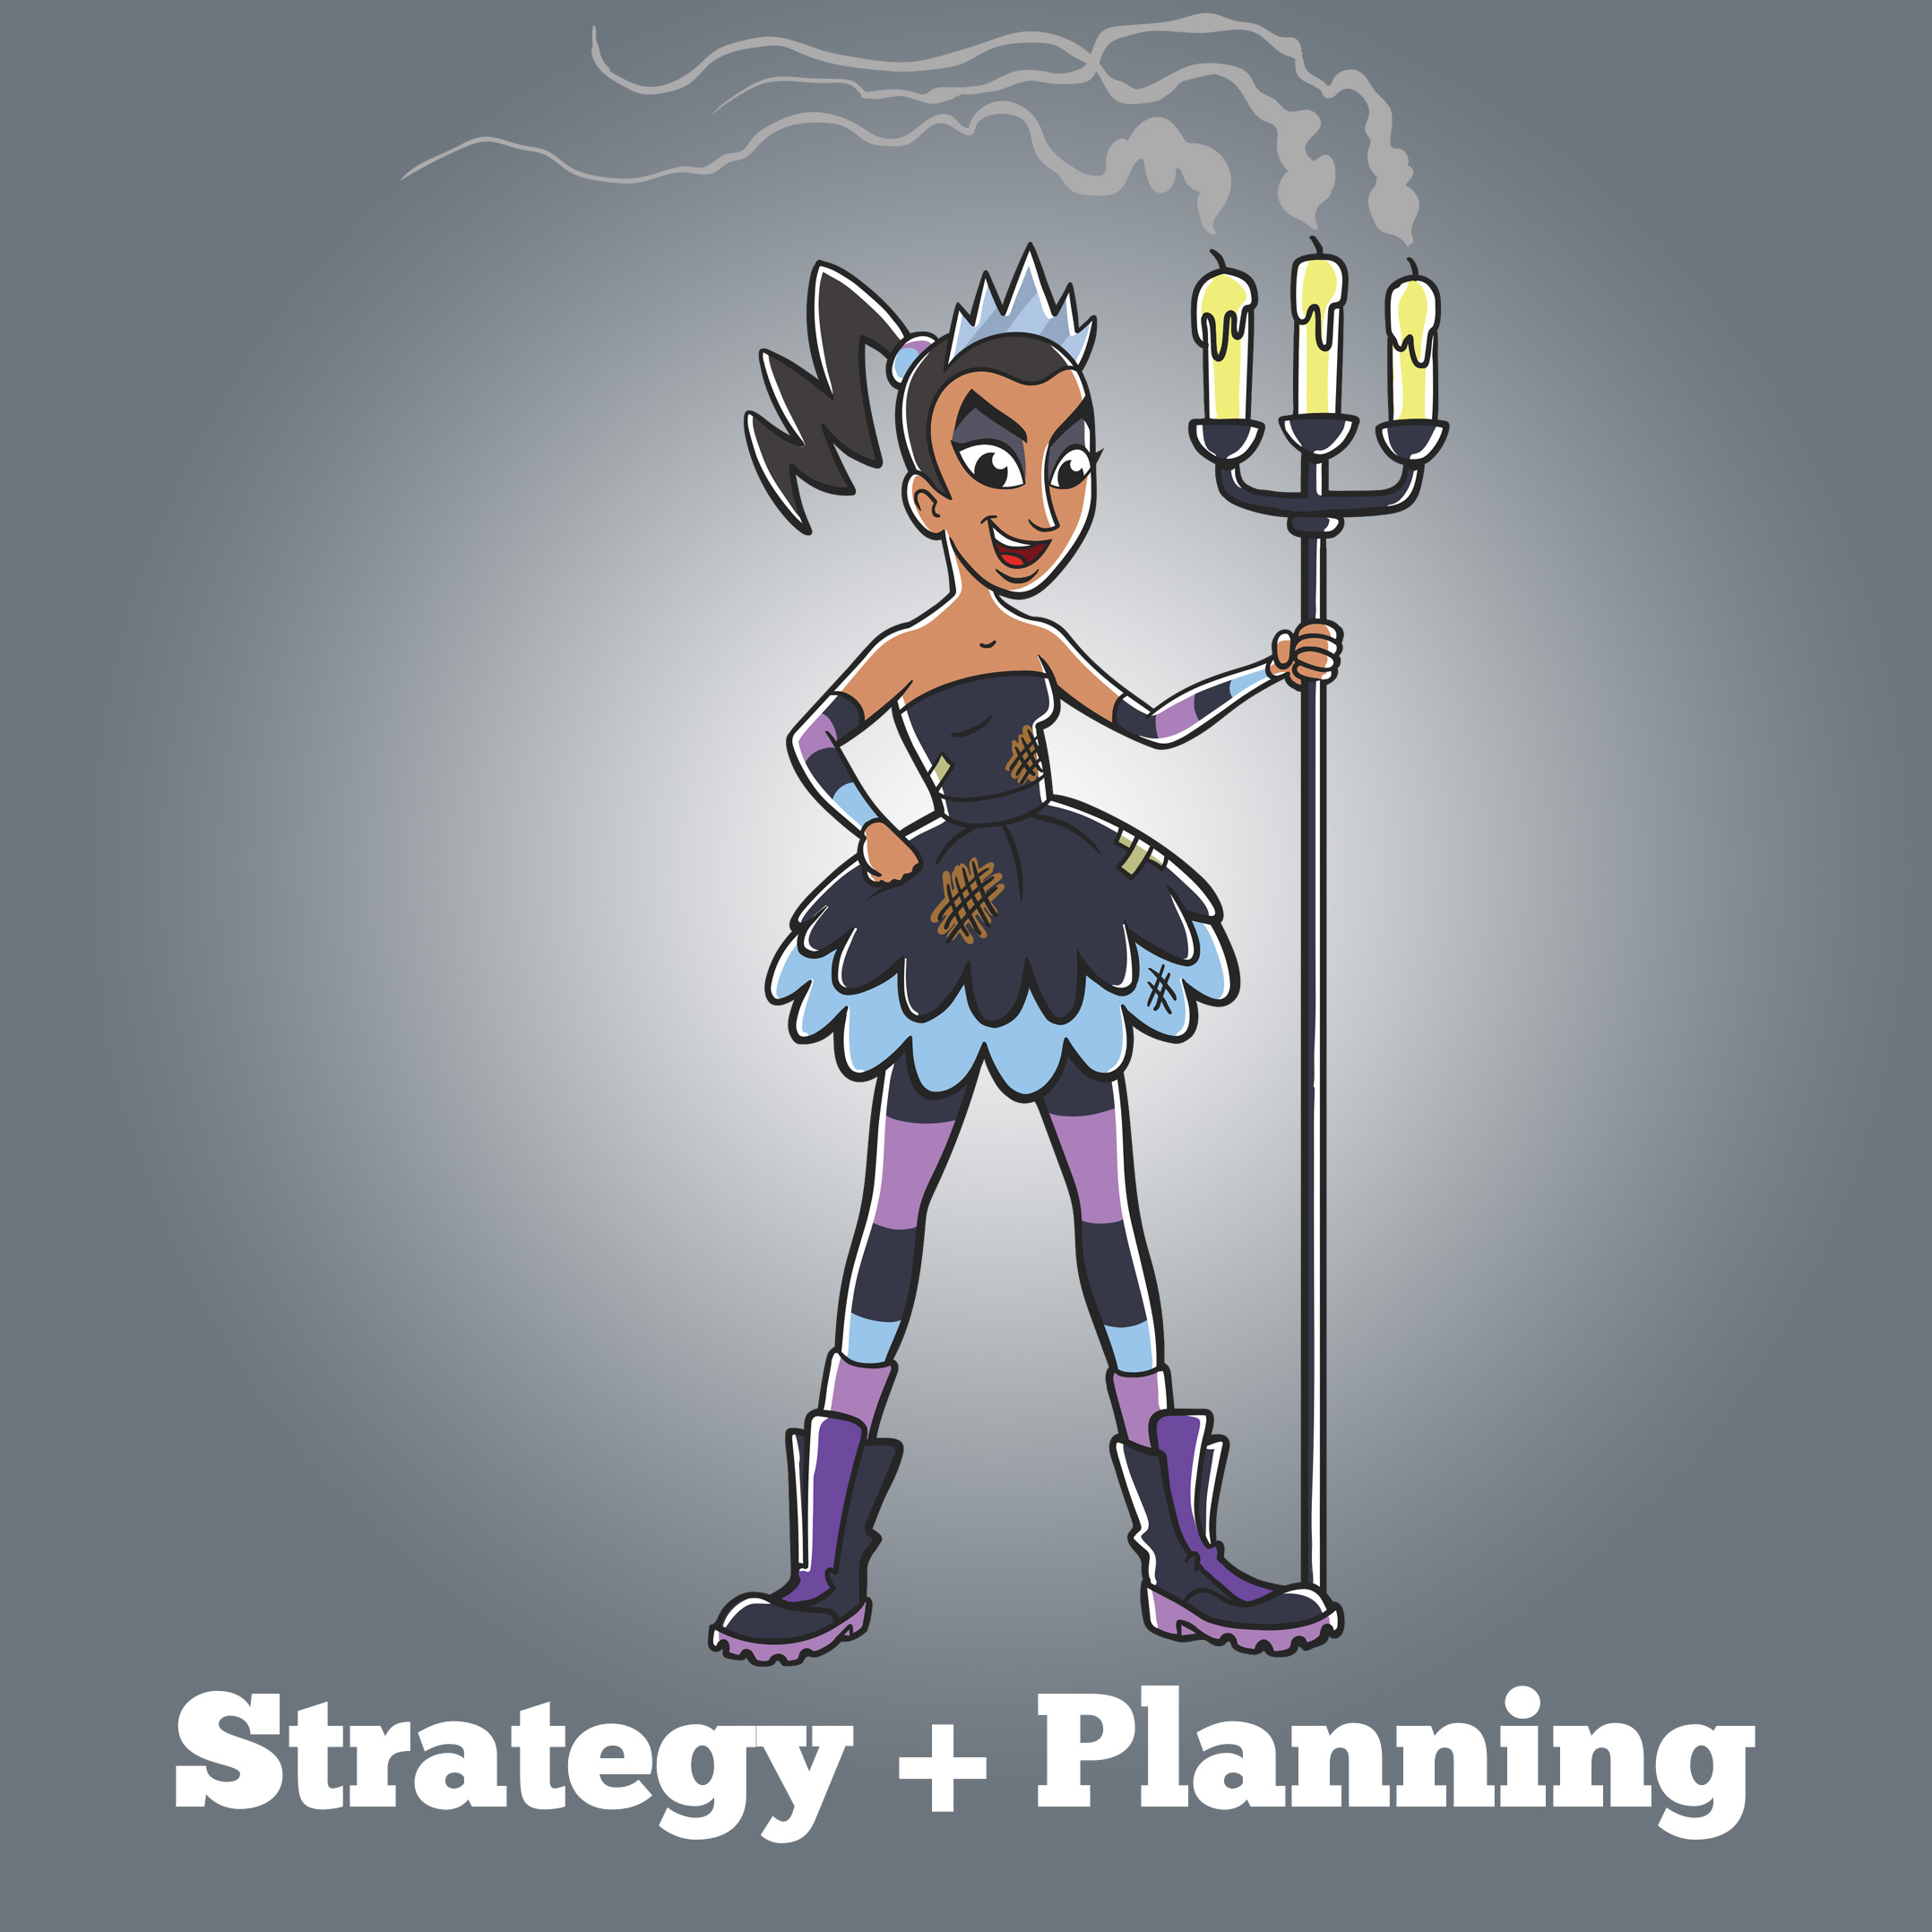 Level 2: Strategy + Planning